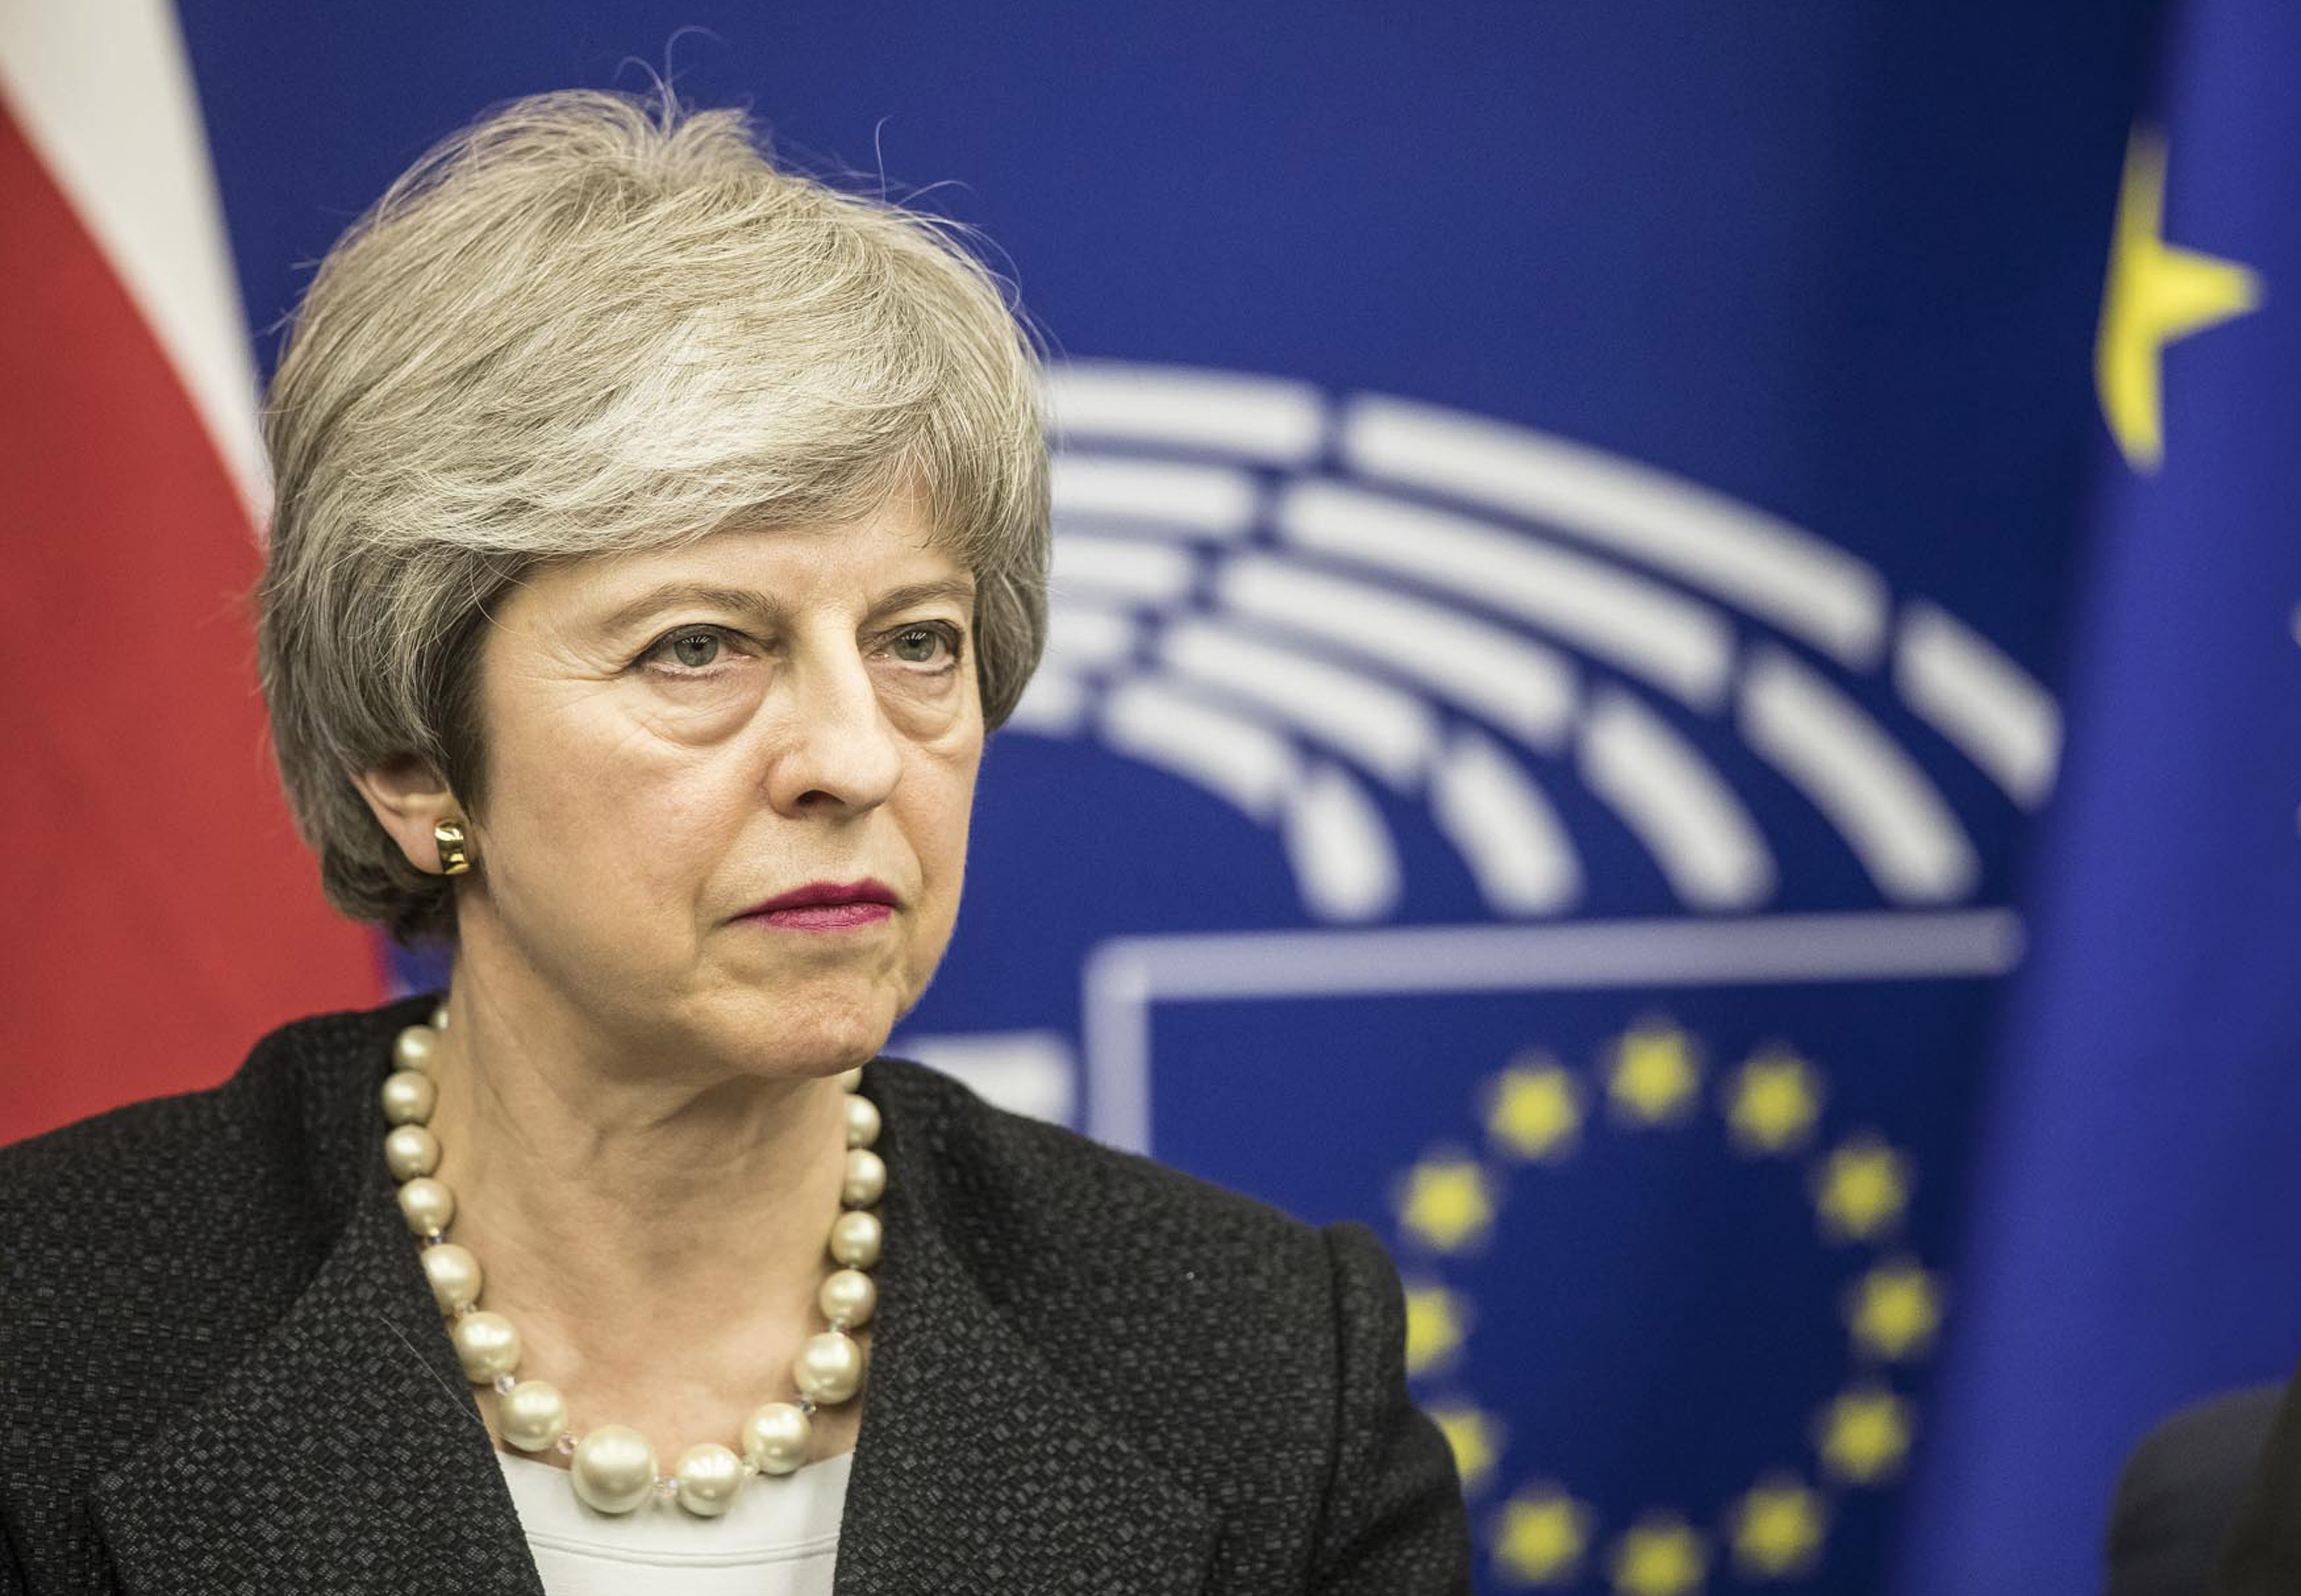 UK prime minister set to put her EU divorce deal to the test